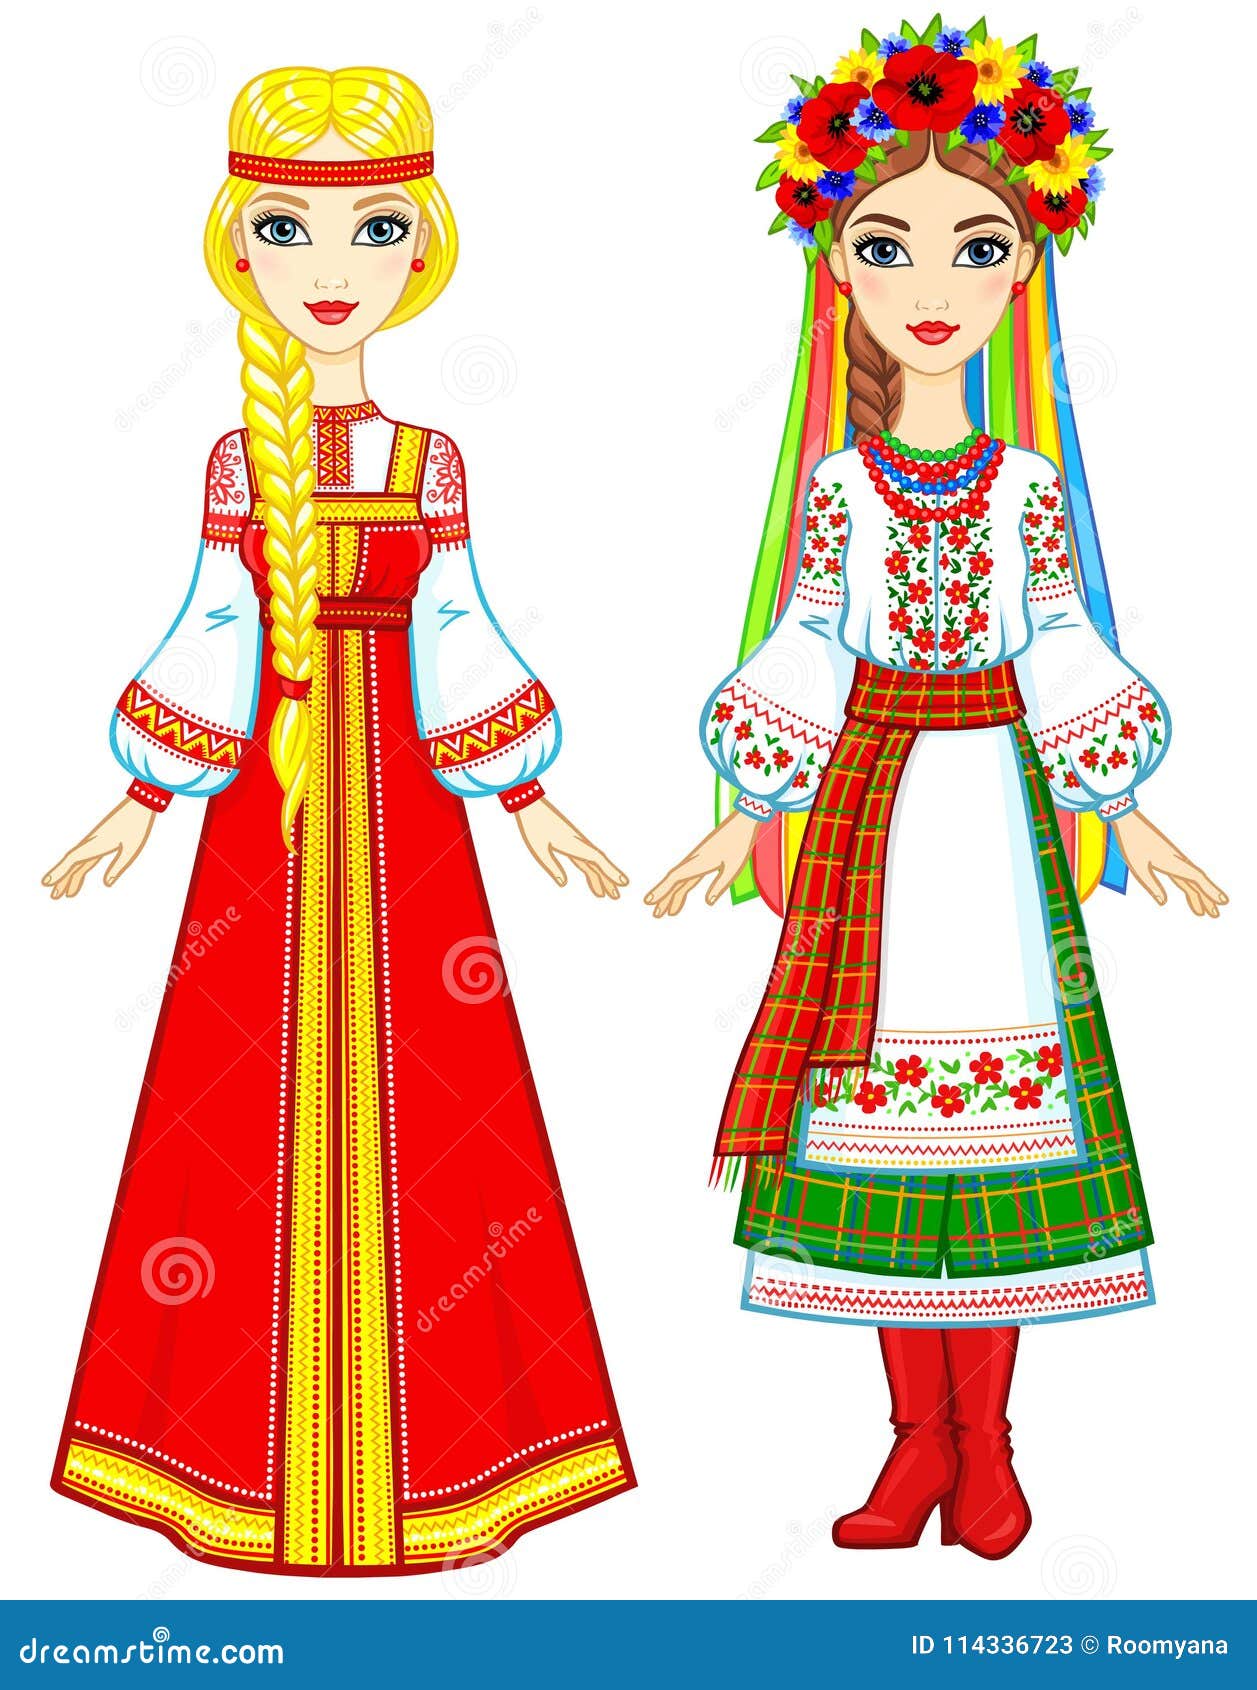 Slavic People. Animation Portrait of the Russian and Ukrainian Woman in ...